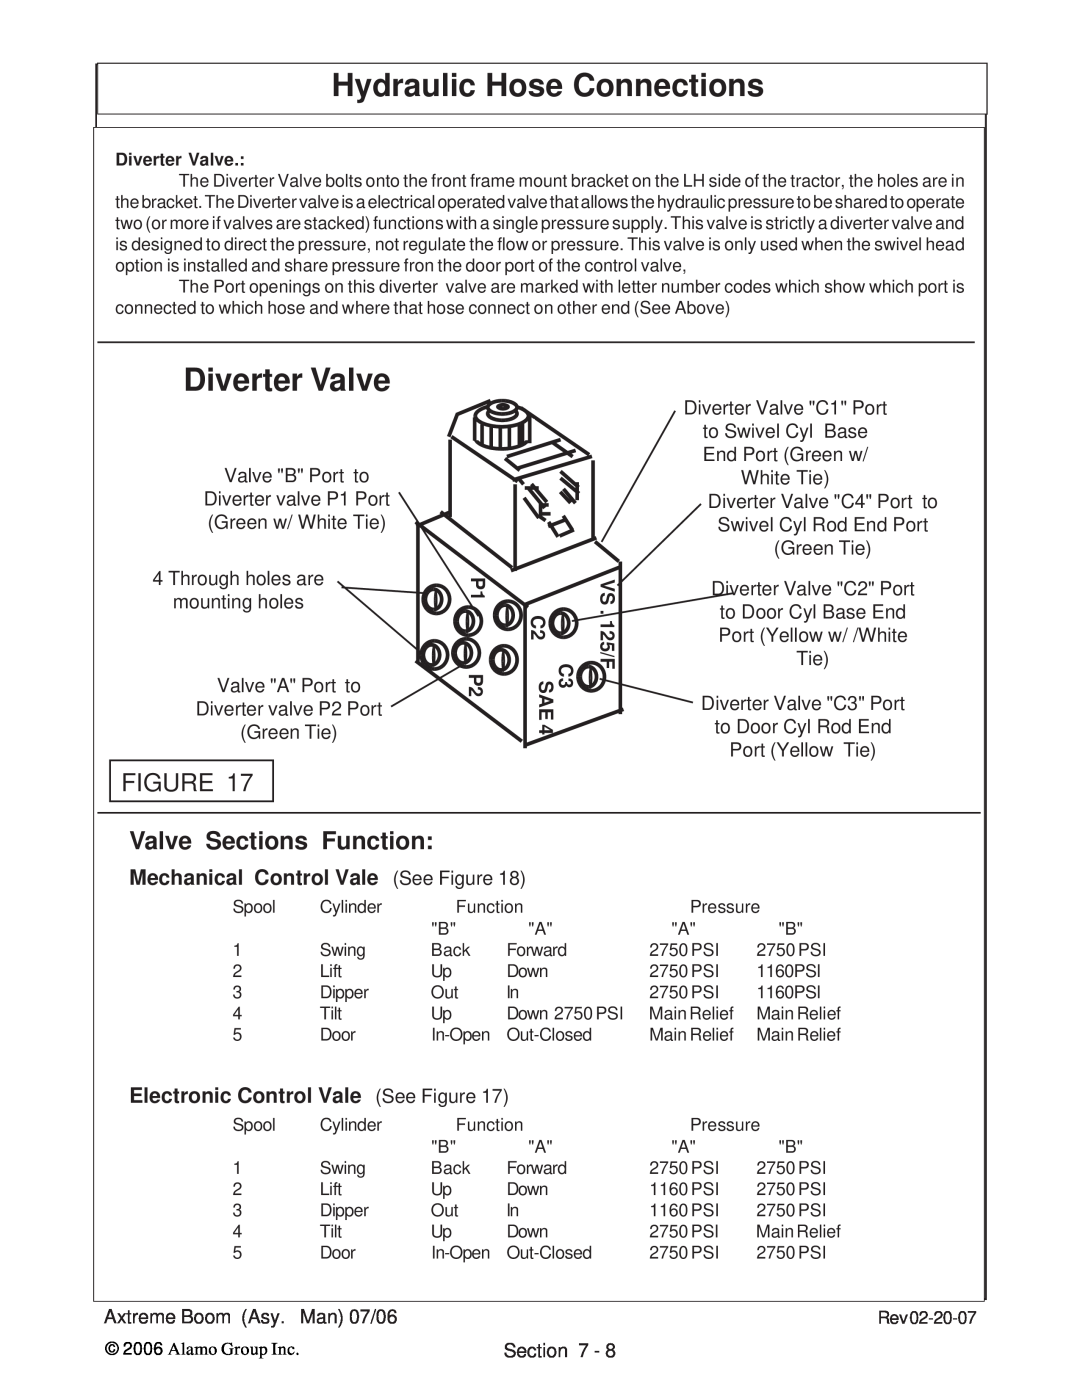 Alamo 02984405 Diverter Valve, Valve Sections Function, Hydraulic Hose Connections, Mechanical Control Vale 